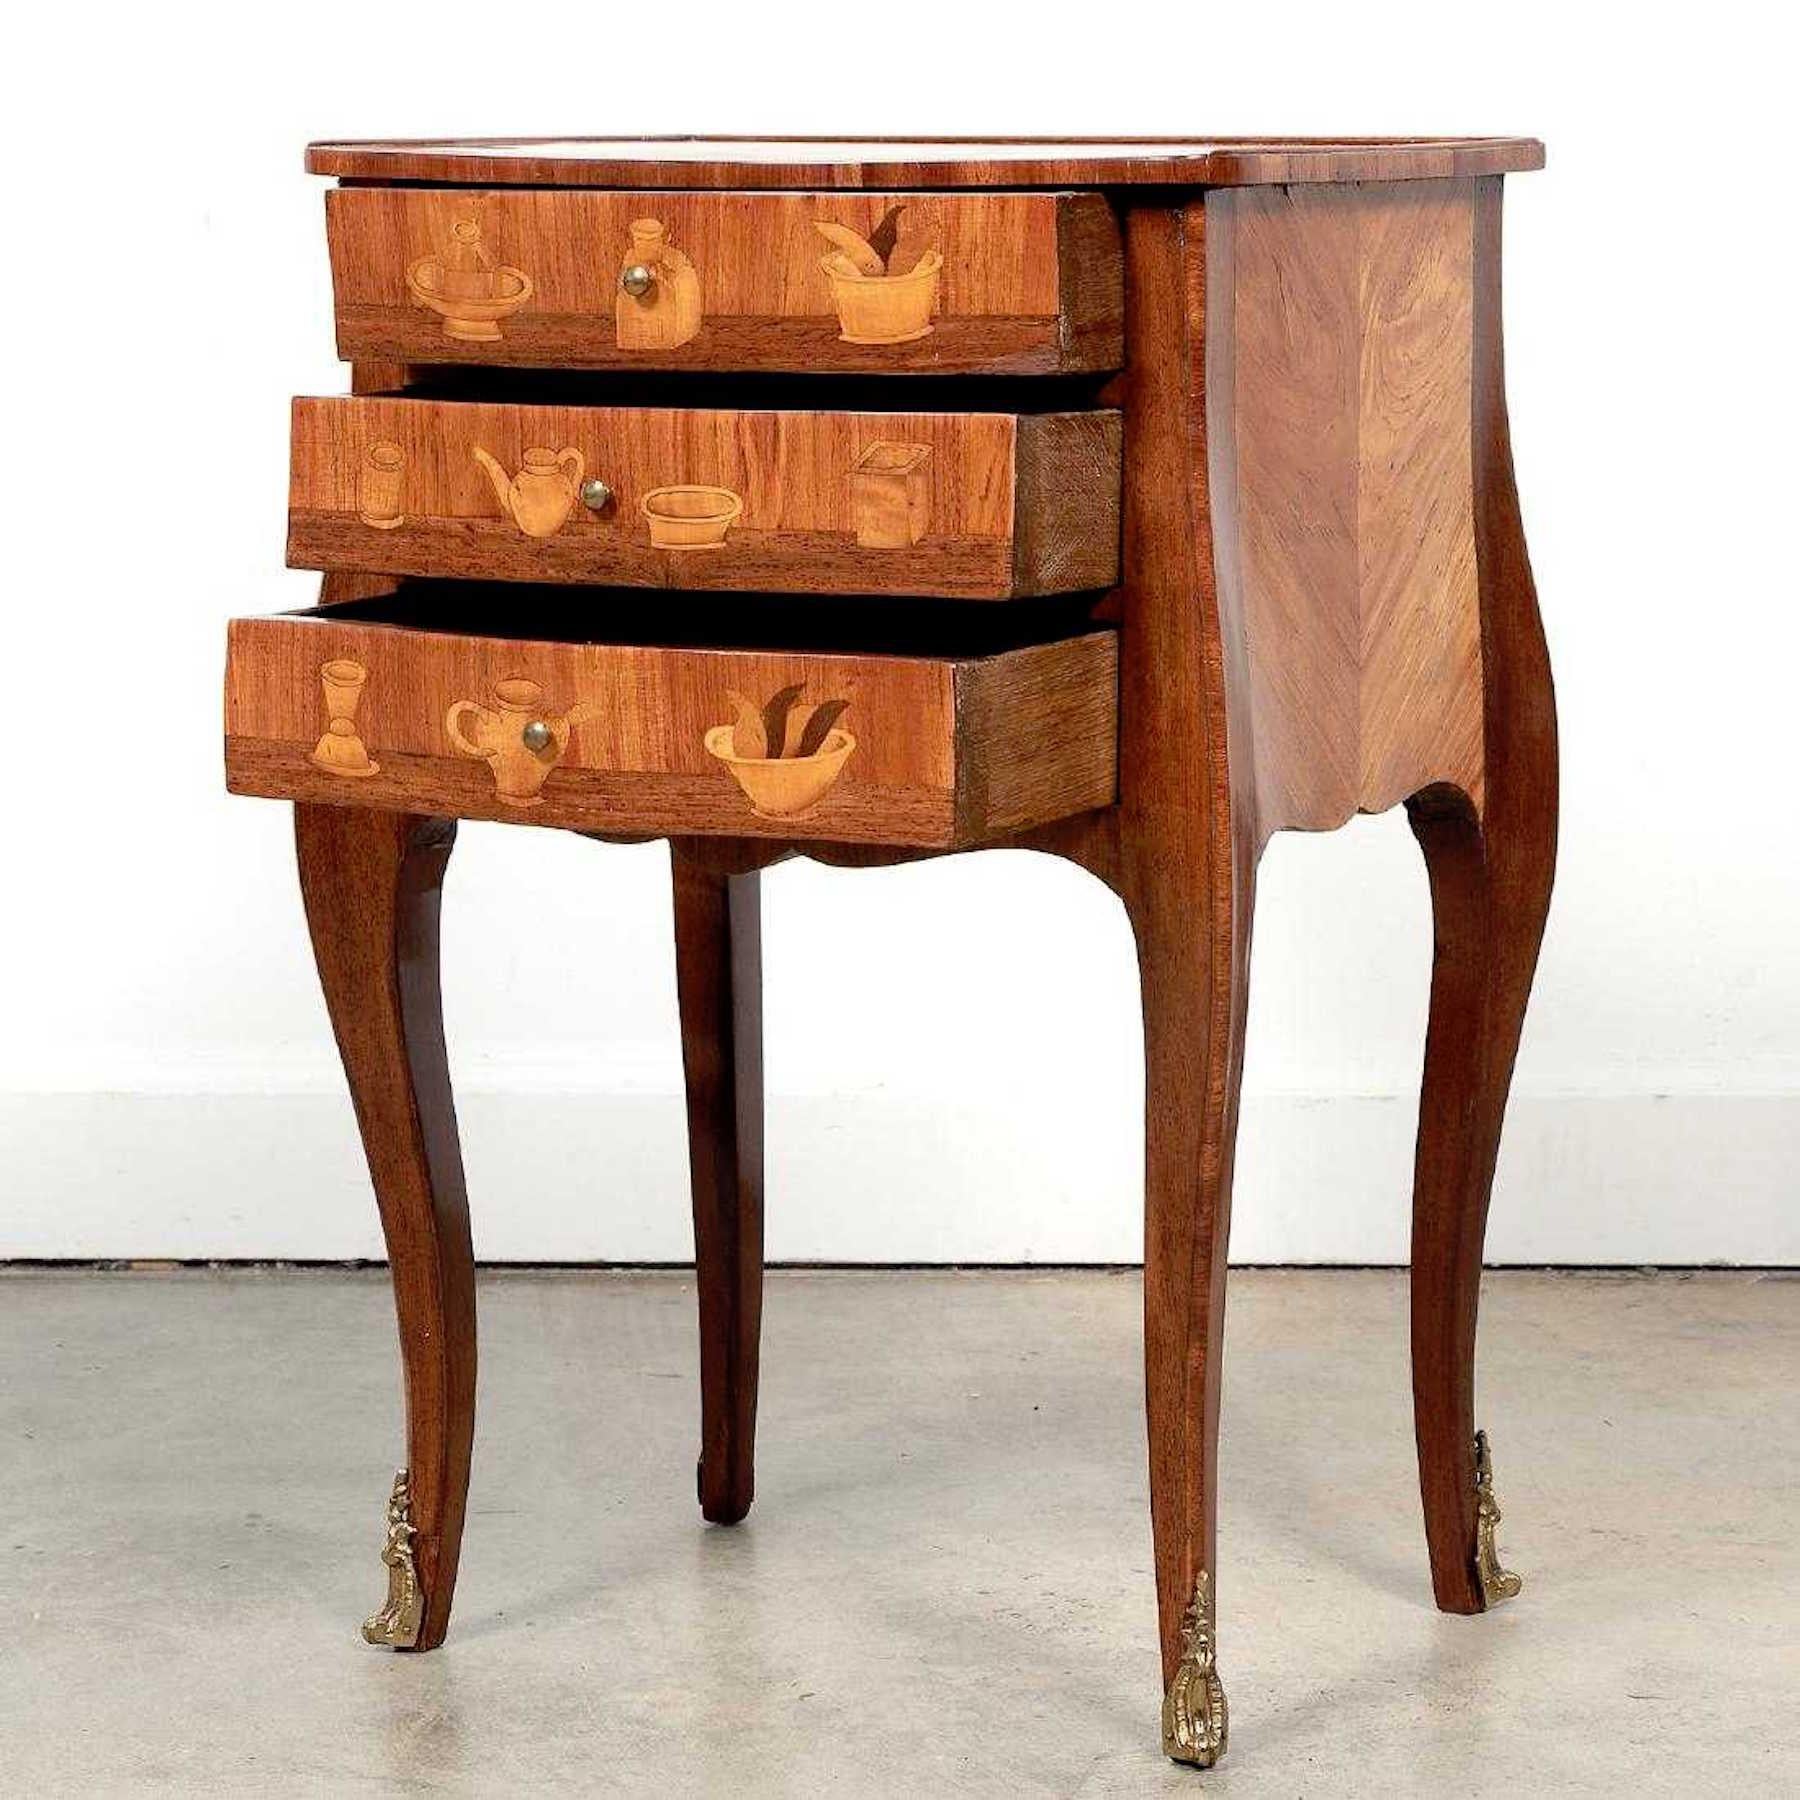 Louis XVI style king and tulip wood marquetry end table, fitted with three drawers with exotic woods marquetry inlay.



